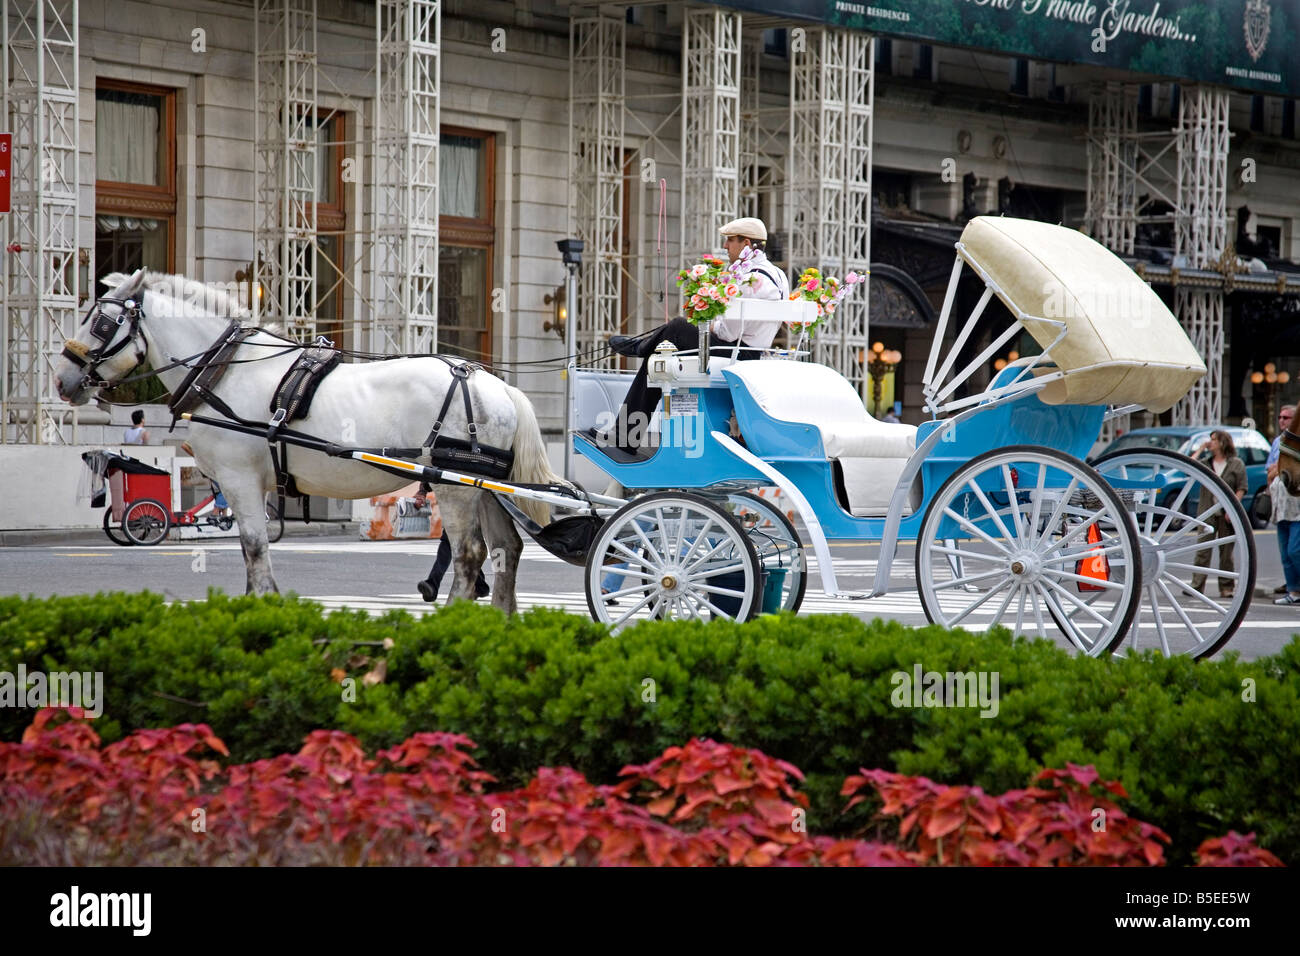 Horse carriage, Central Park, New York City, New York, USA, North America Stock Photo